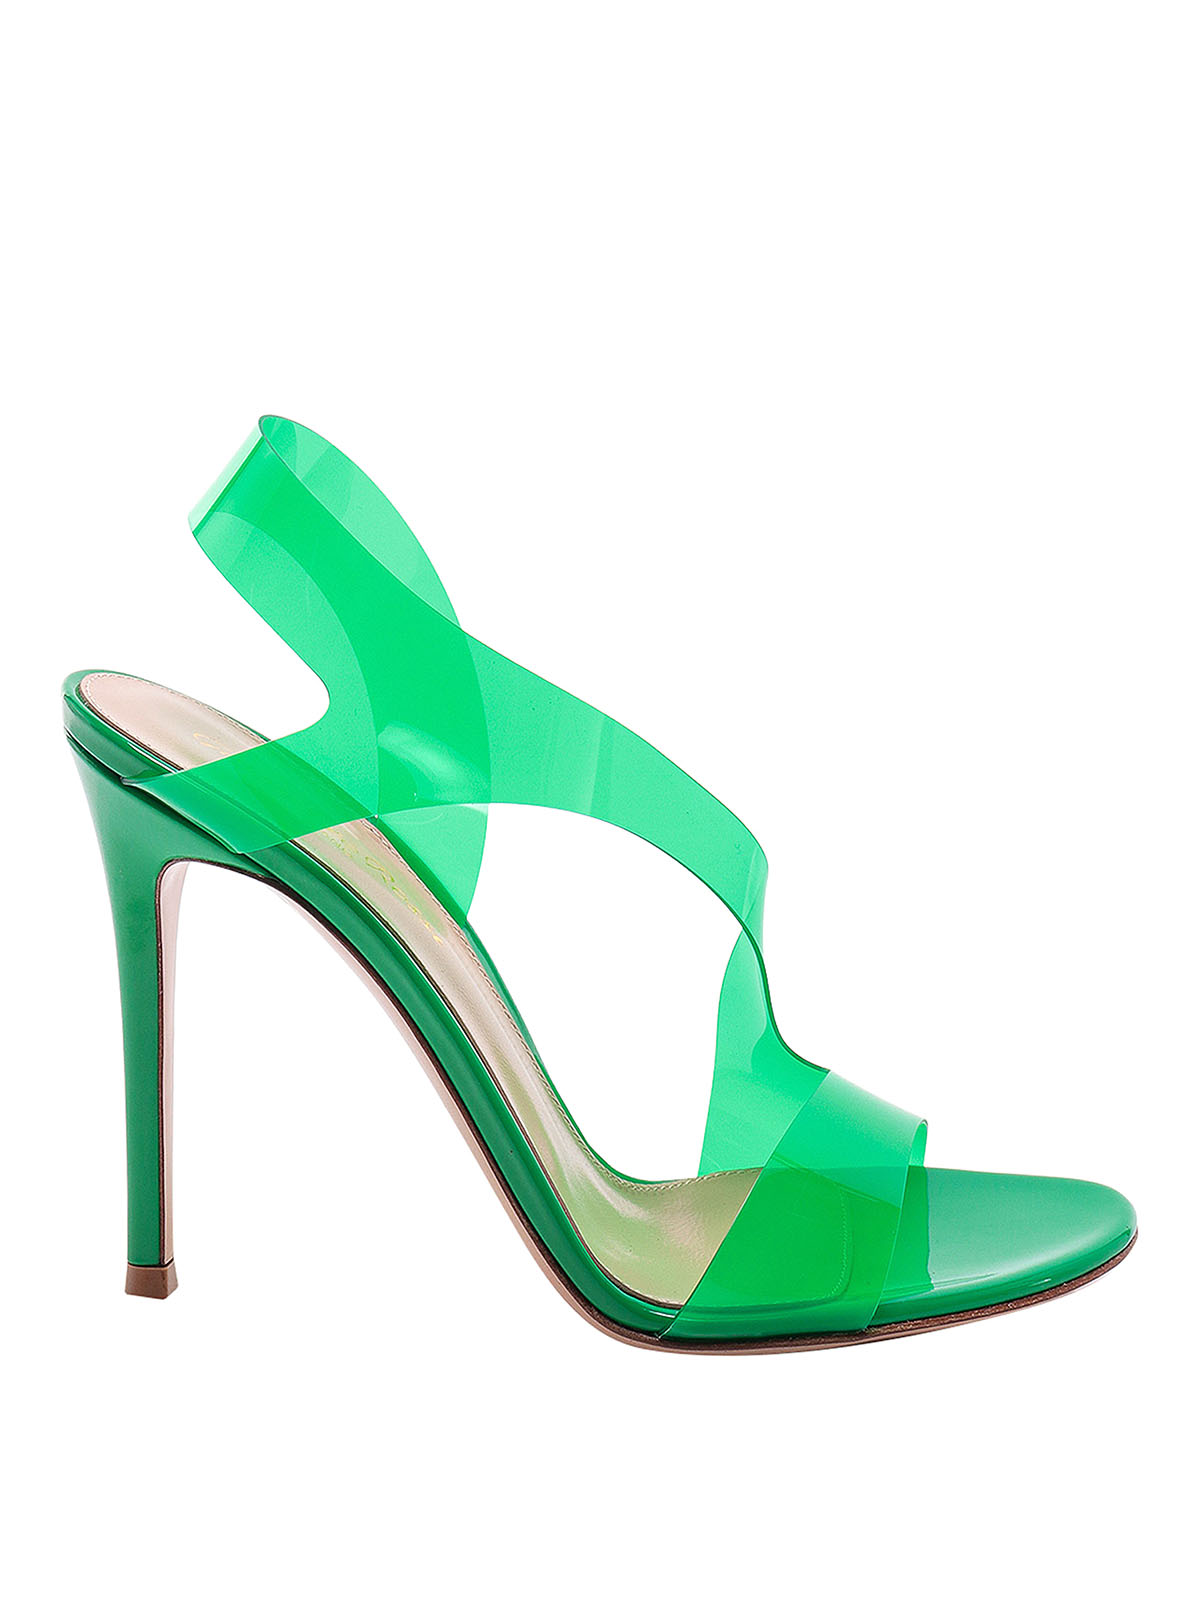 Gianvito Rossi Patent Leather Sandals In Green